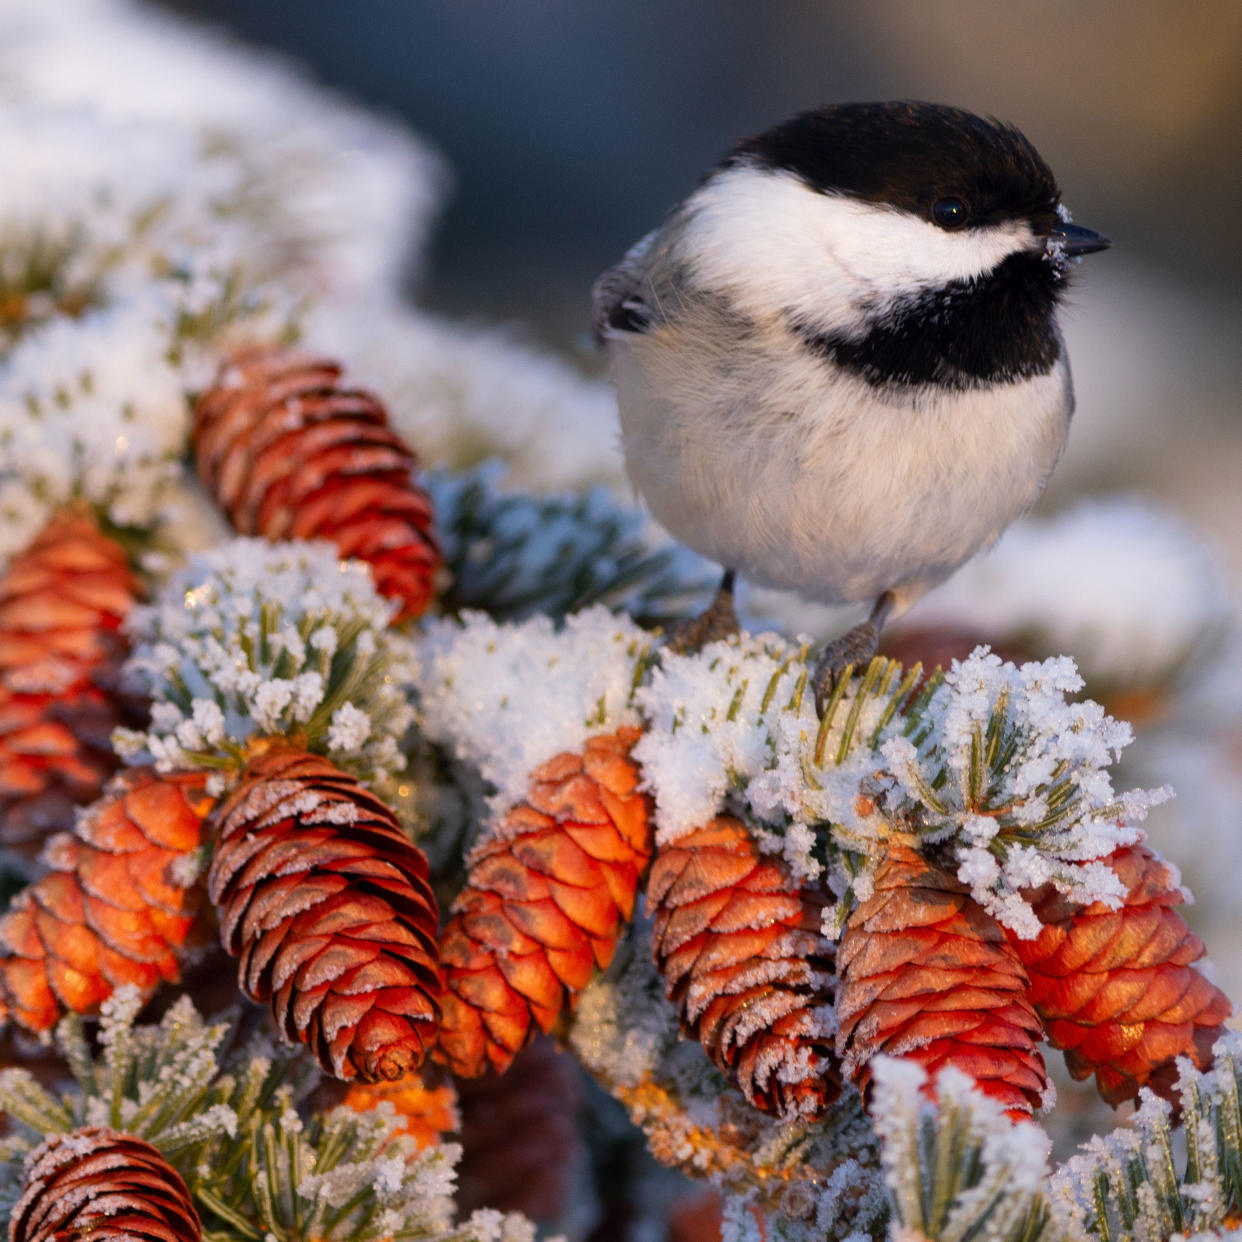  Chickadee sitting on spruce branch covered in snow in winter. 